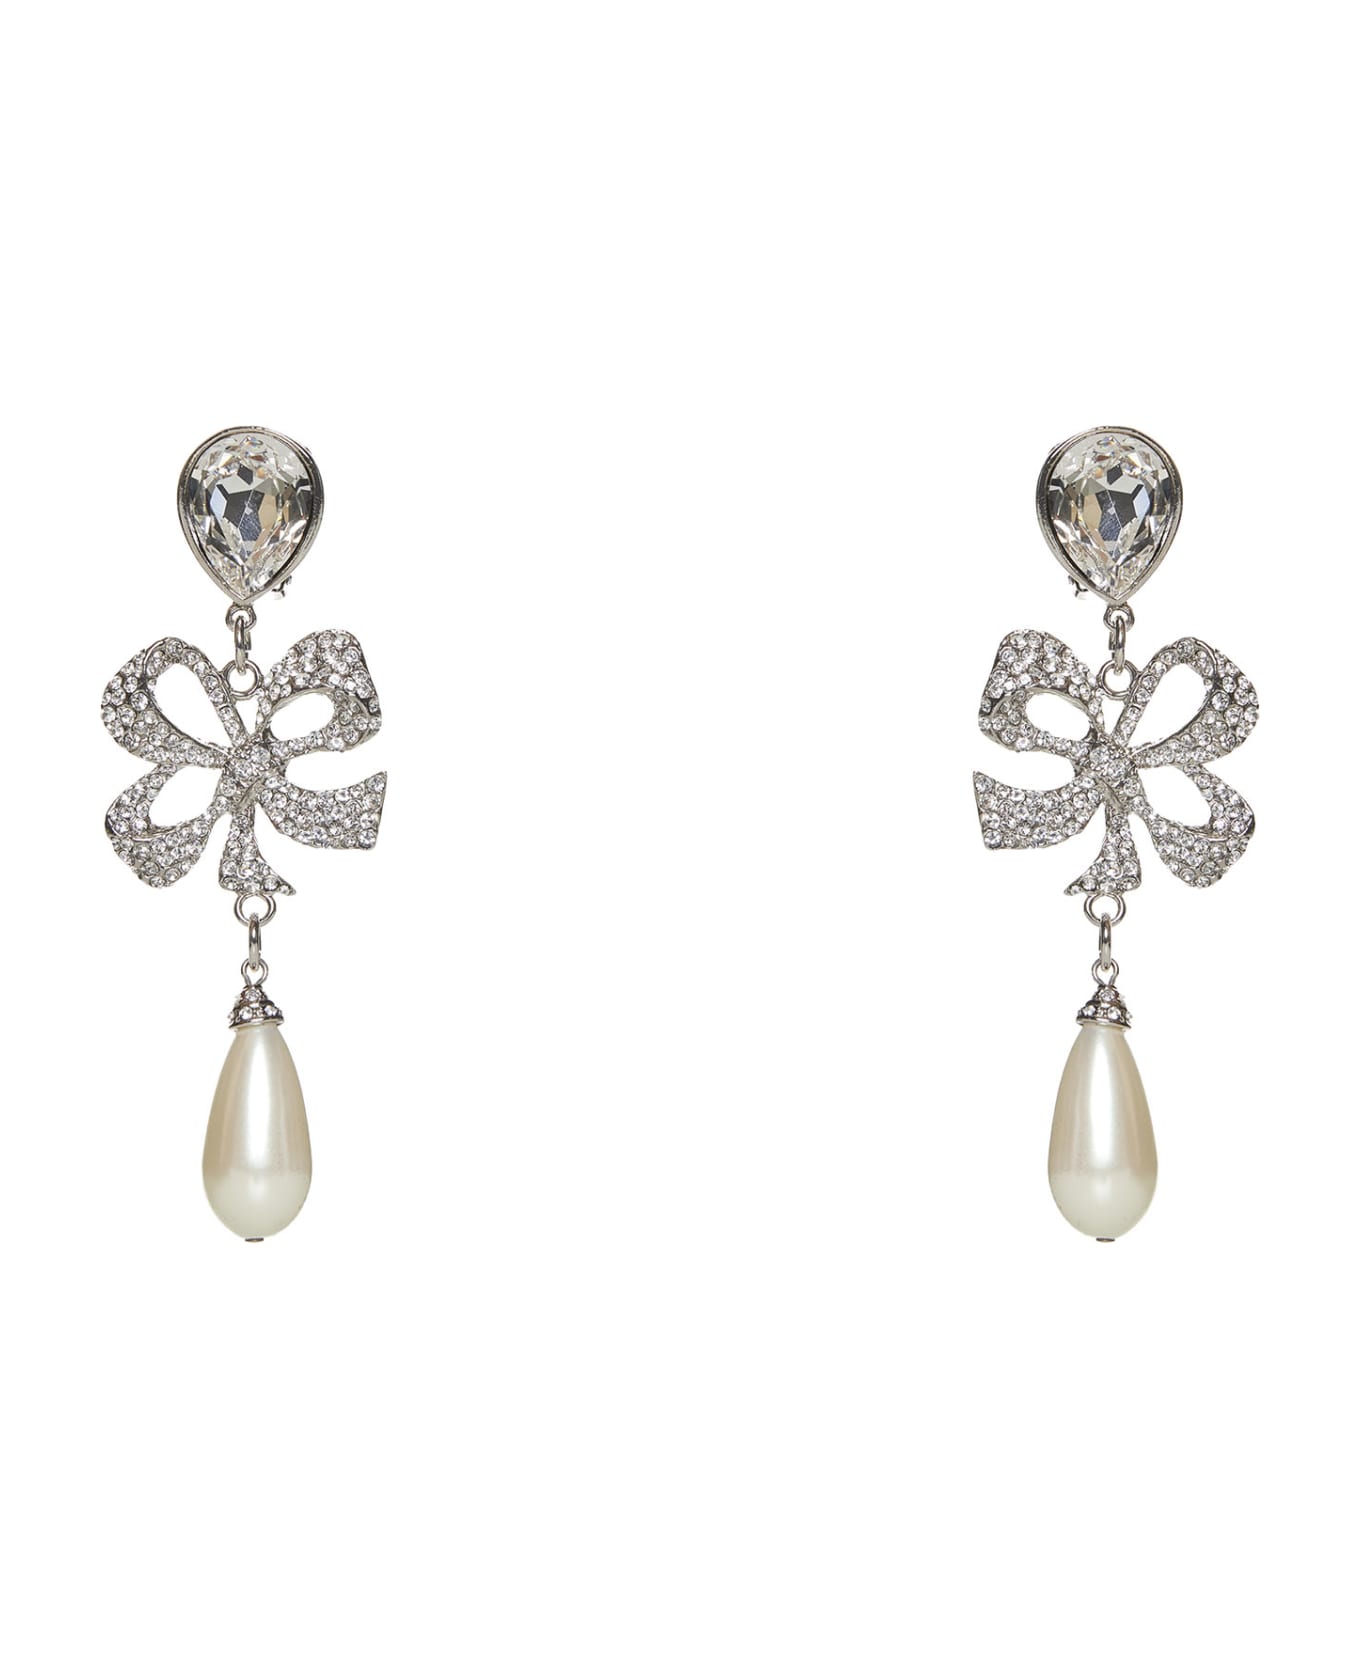 Alessandra Rich Earrings - Cry-silver イヤリング